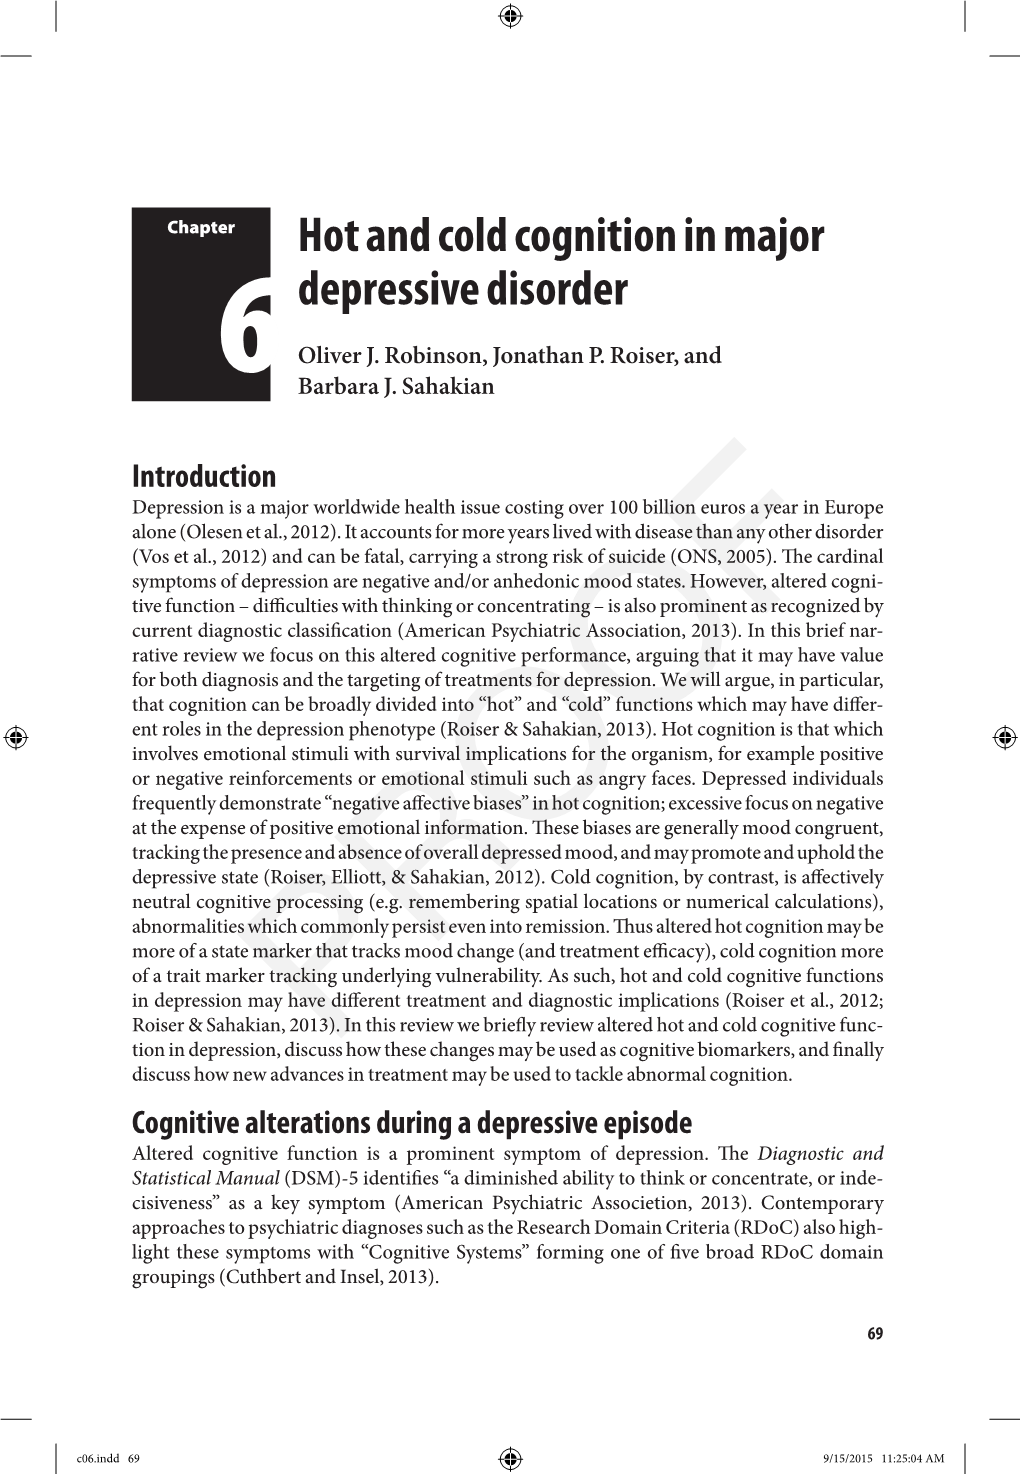 Hot and Cold Cognition in Major Depressive Disorder